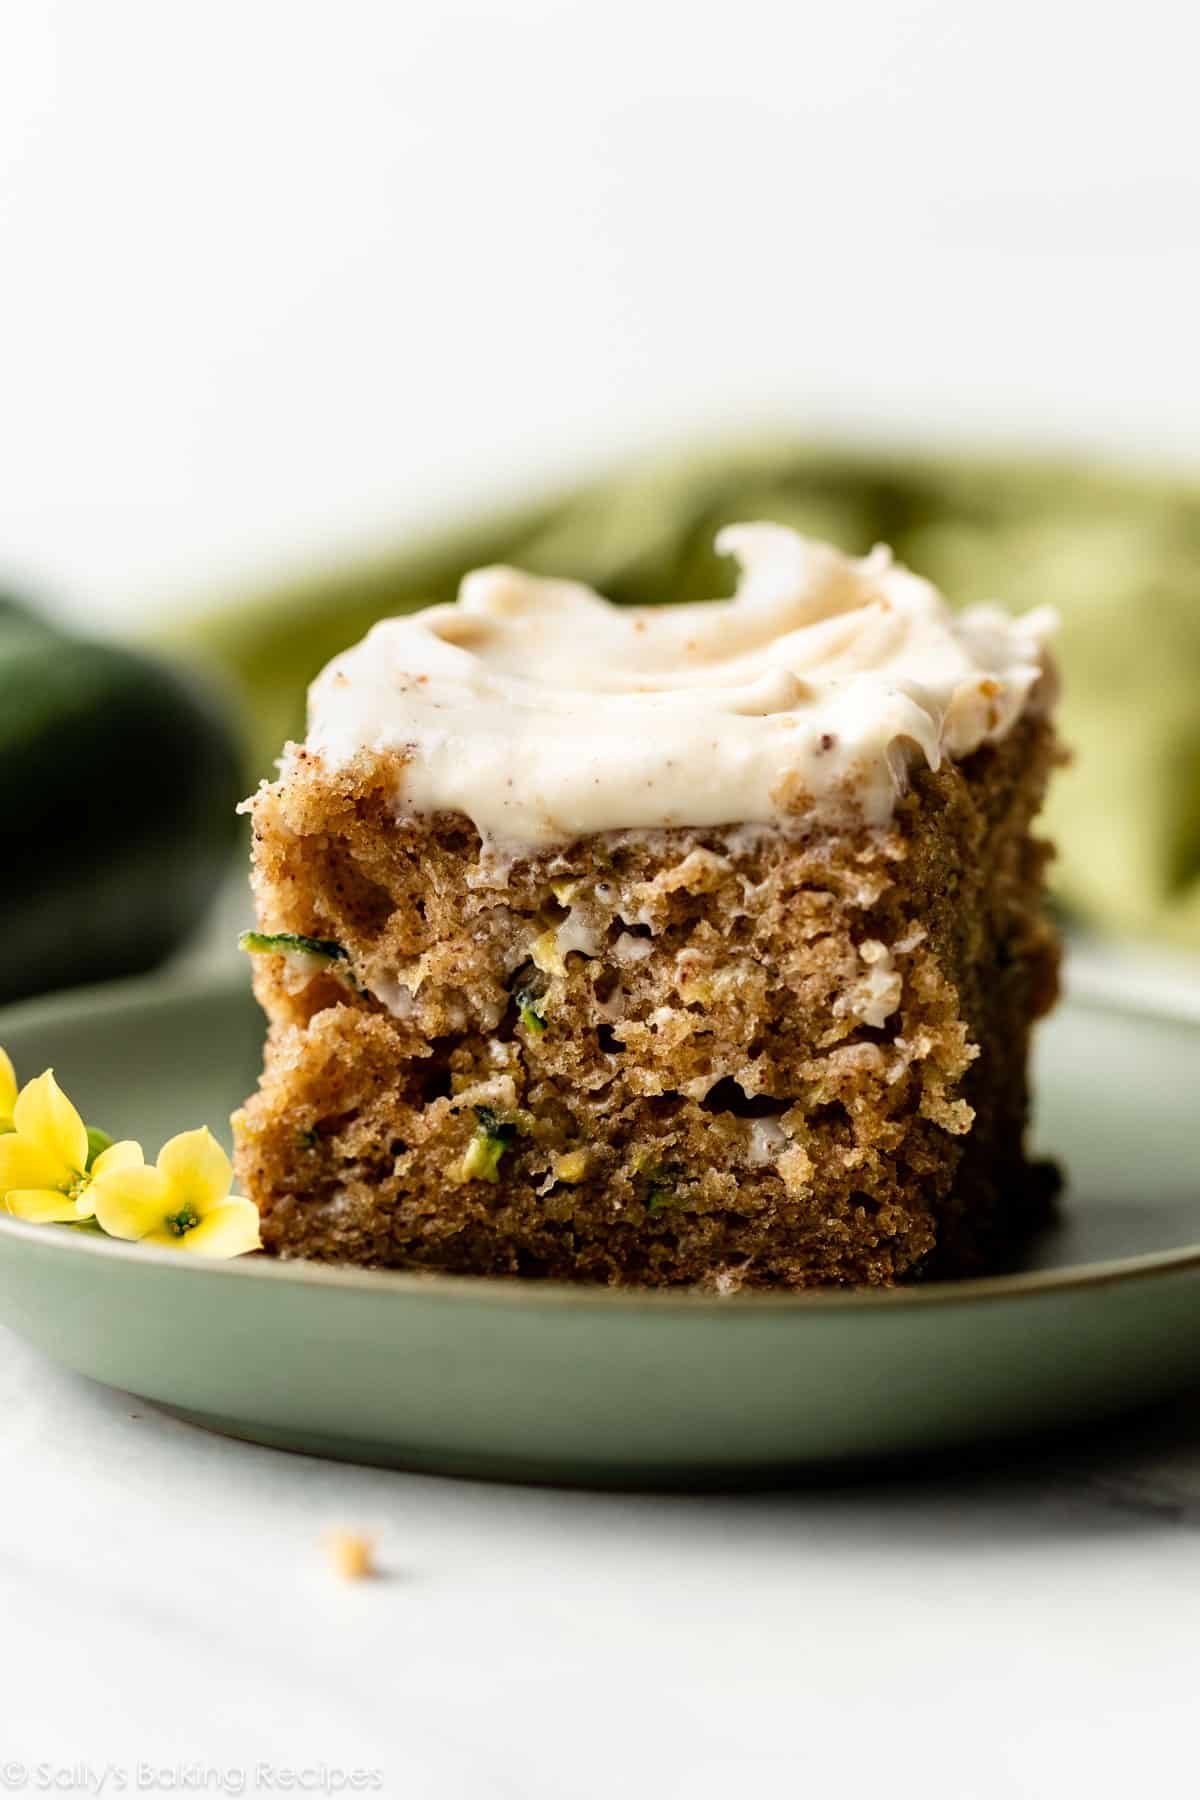 zucchini cake with brown butter cream cheese frosting on green plate.